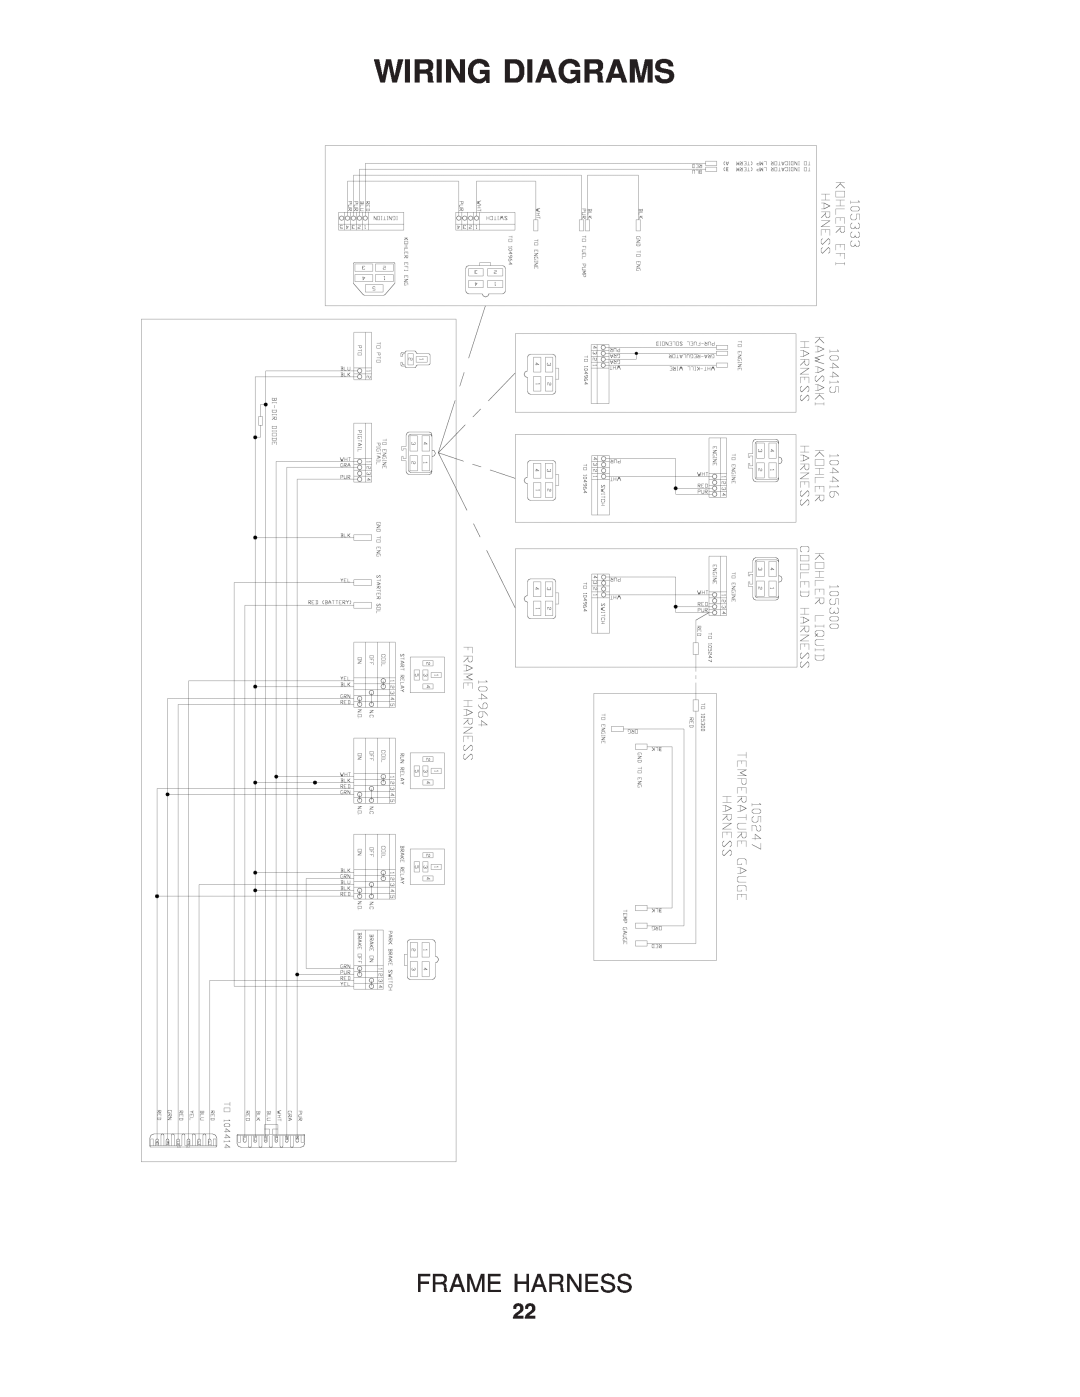 Yazoo/Kees ZVKH52231, ZVKW61251, ZVKW61231, ZVKW52251, ZVKW52231, ZVKHL61231, ZVKH61251 manual Wiring Diagrams, Frame Harness 